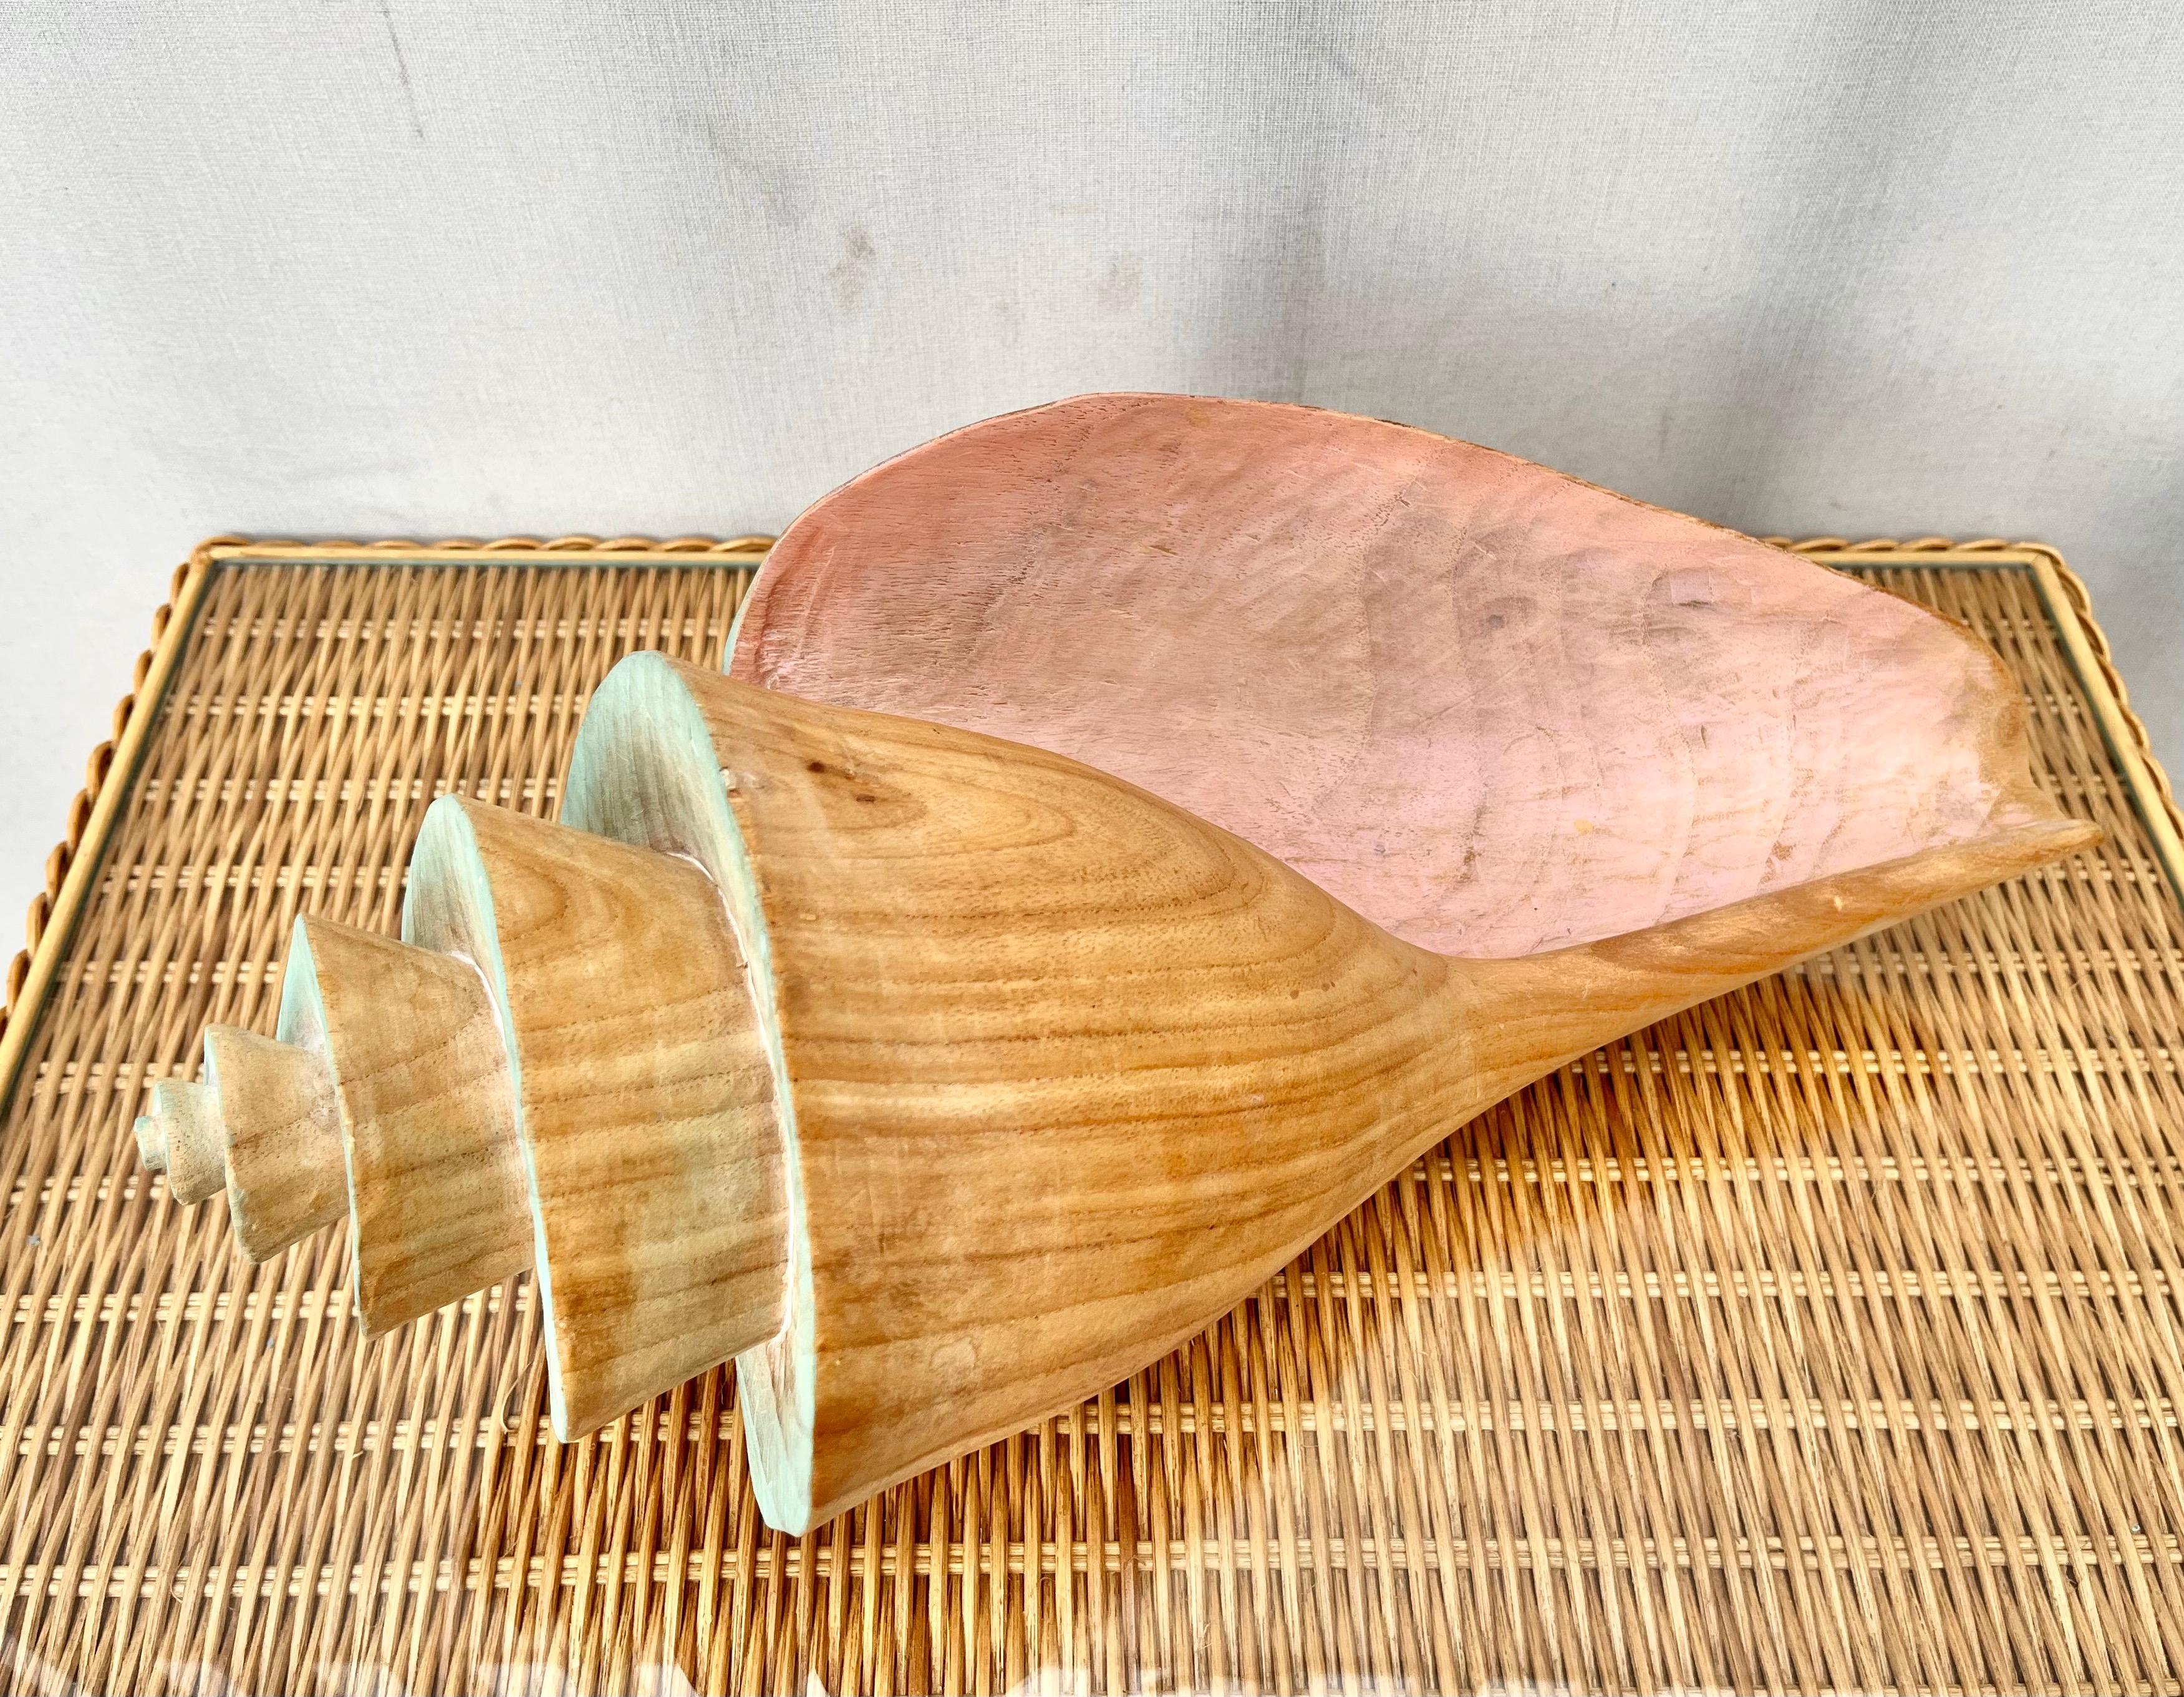 1980s Large Coastal Style Carved Wood Conch Seashell Sculpture.  2